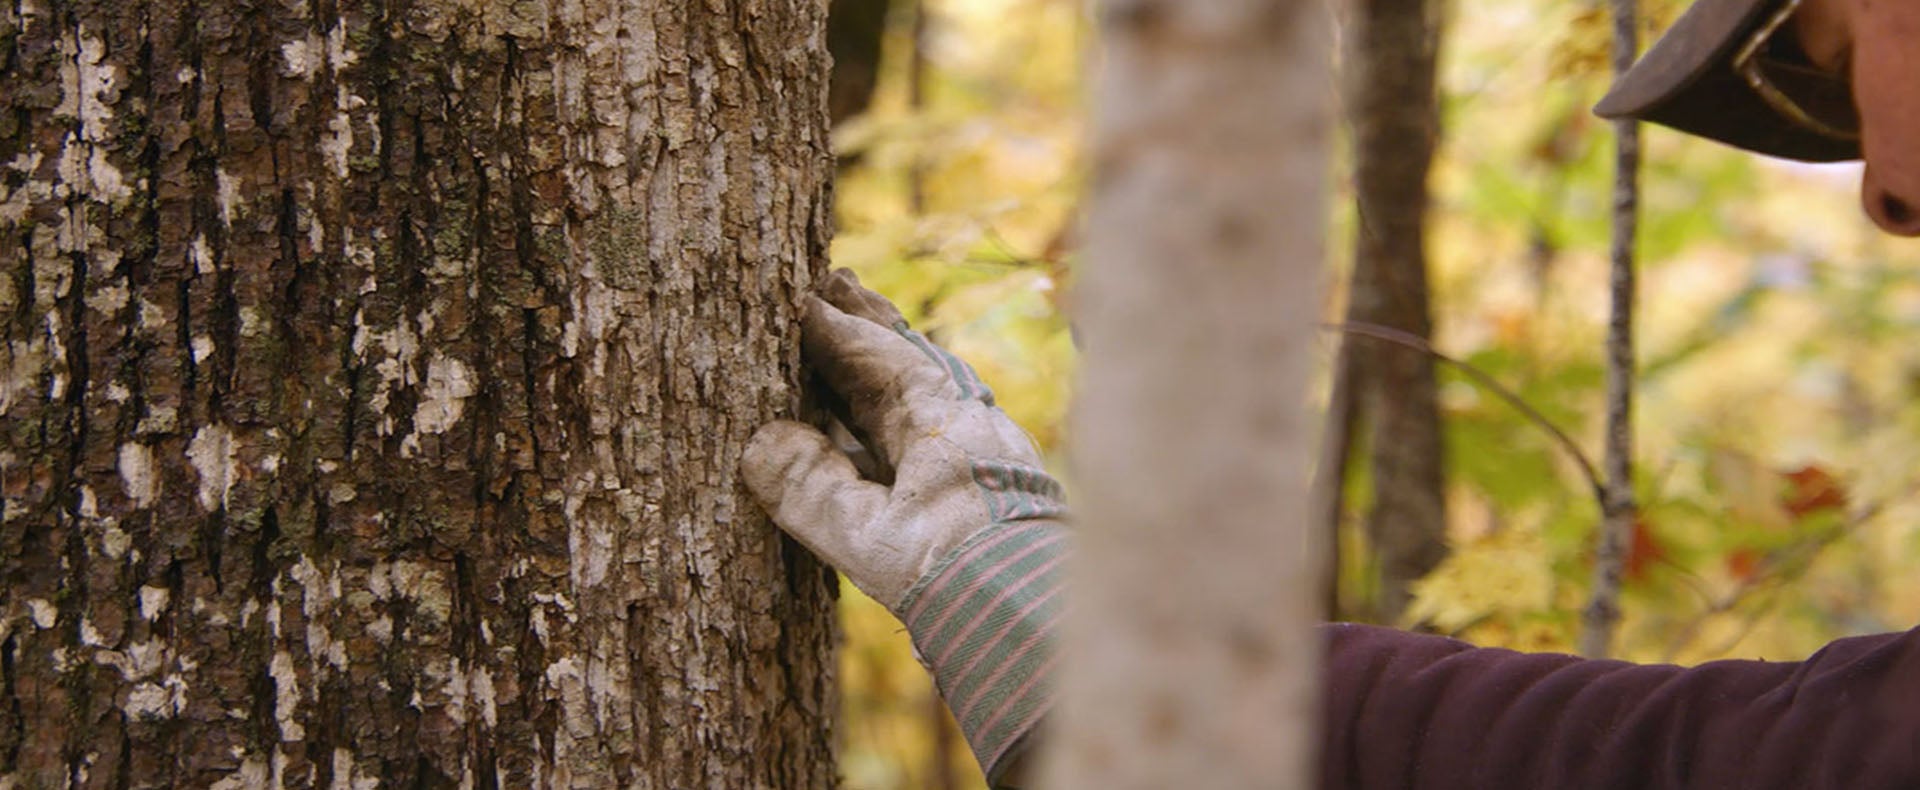 Man touching Basswood tree in forest